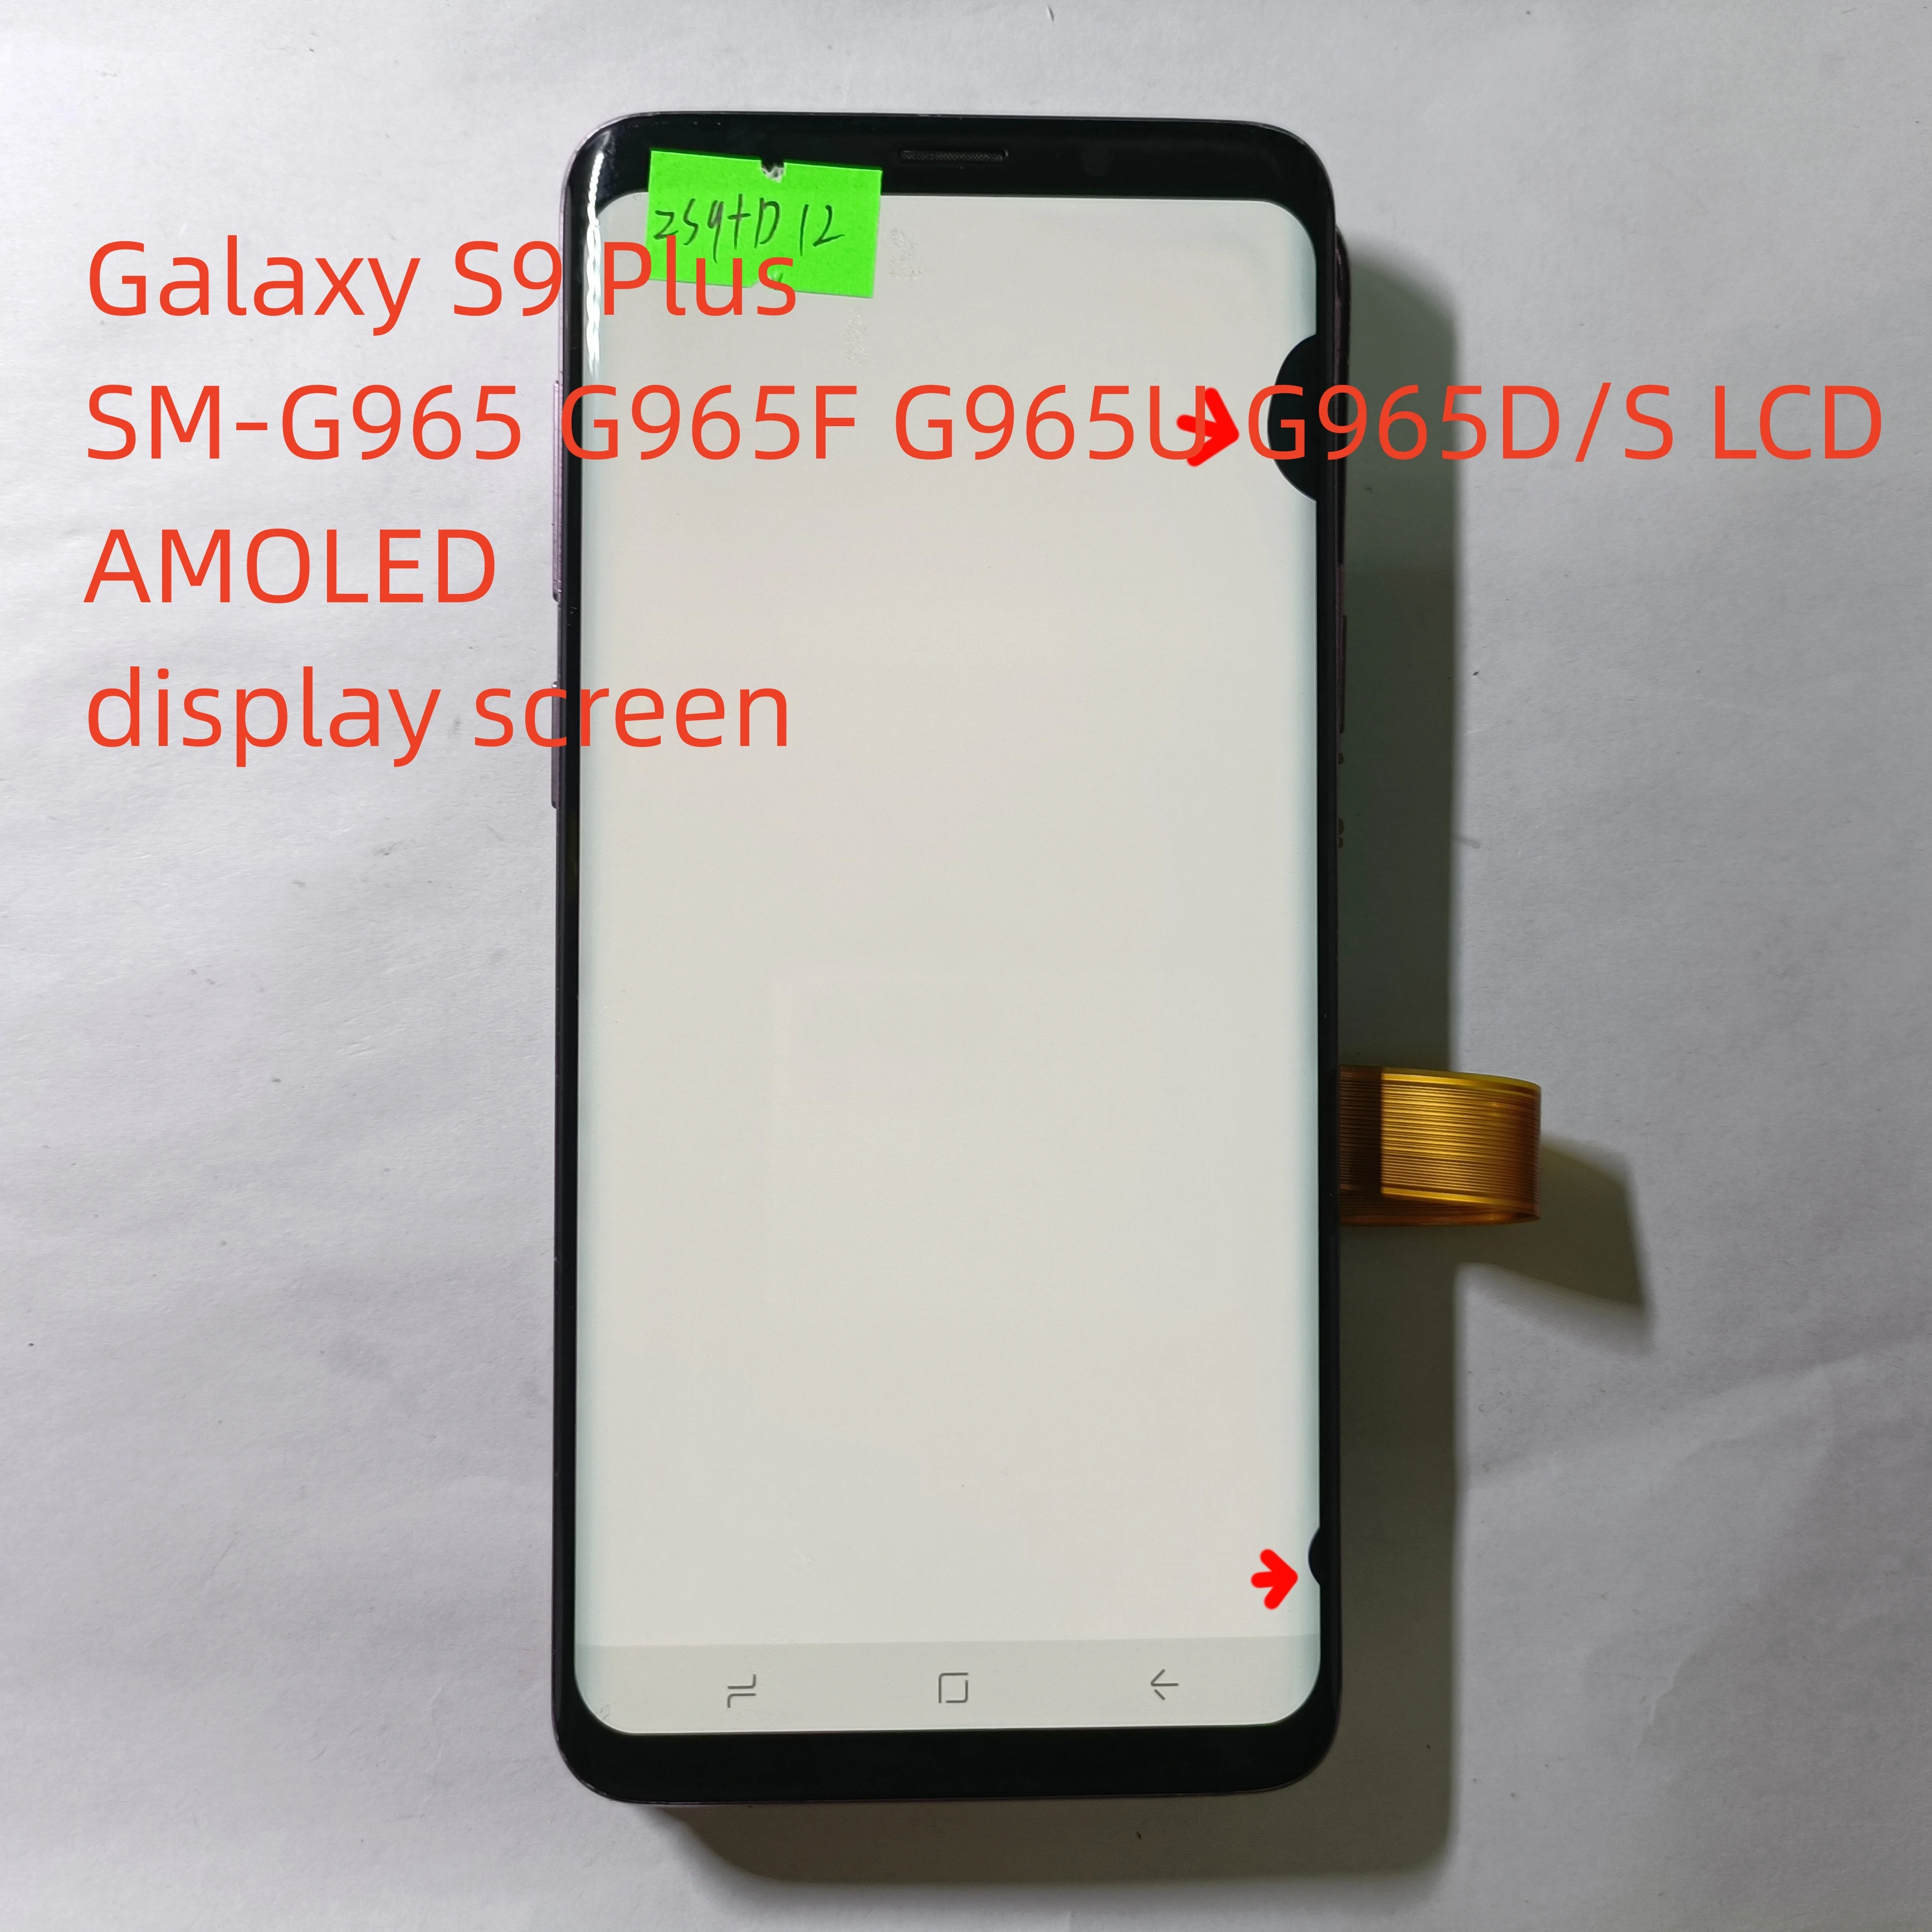 

S9plus Black Dot Defect in AMOLED Material, Original Galaxy S9 Plus SM-G965 G965F G965U G965D/S LCD Display Screen Assembly